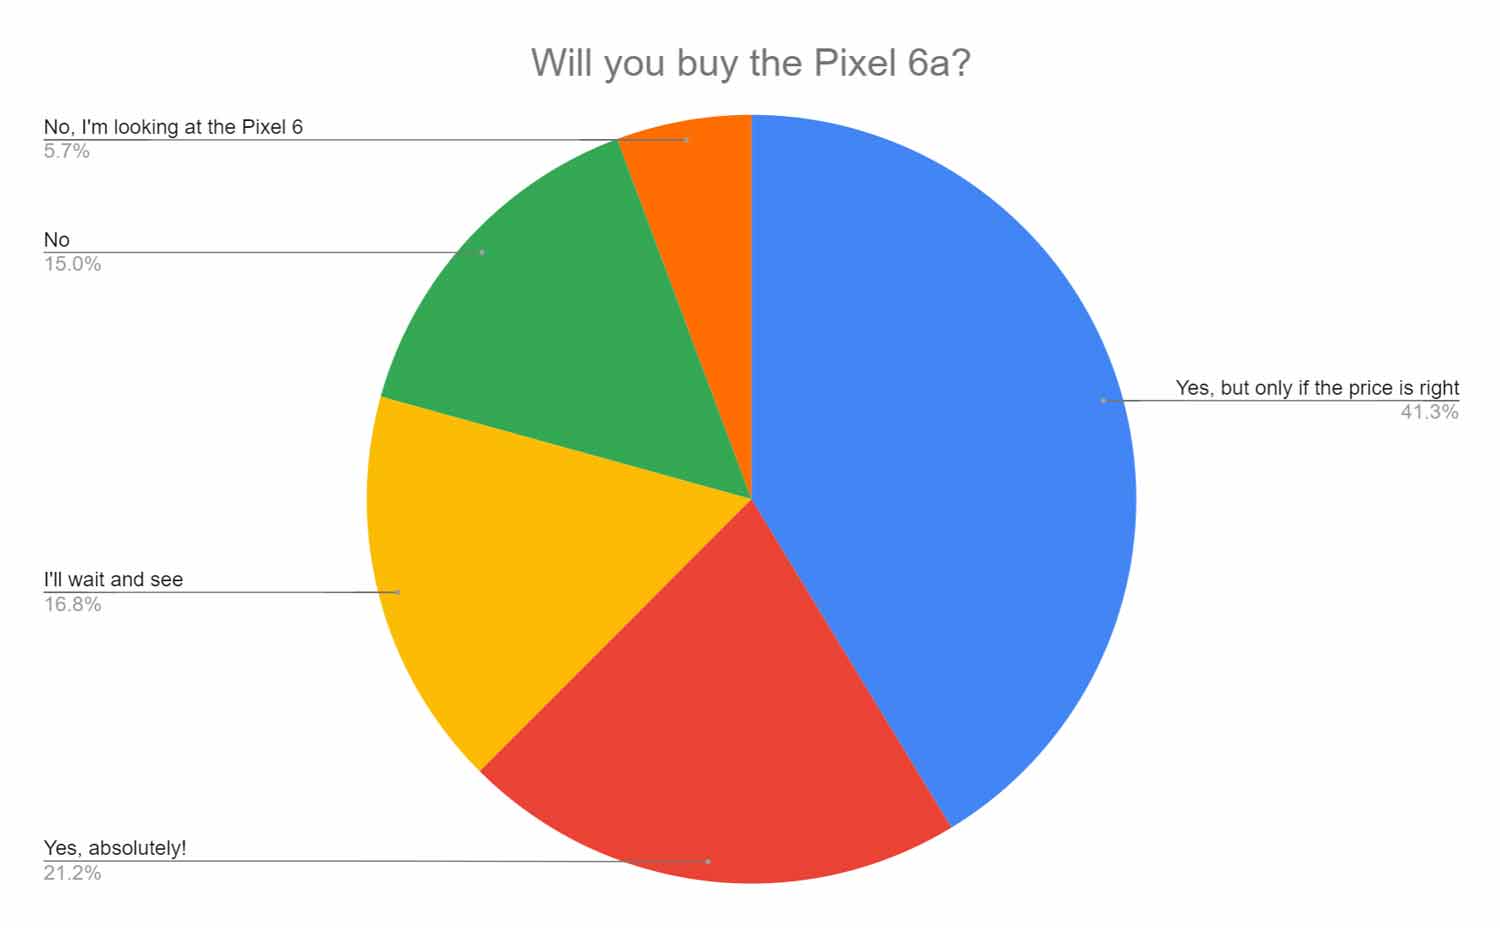 How many 9to5Google readers will buy the Pixel 6a